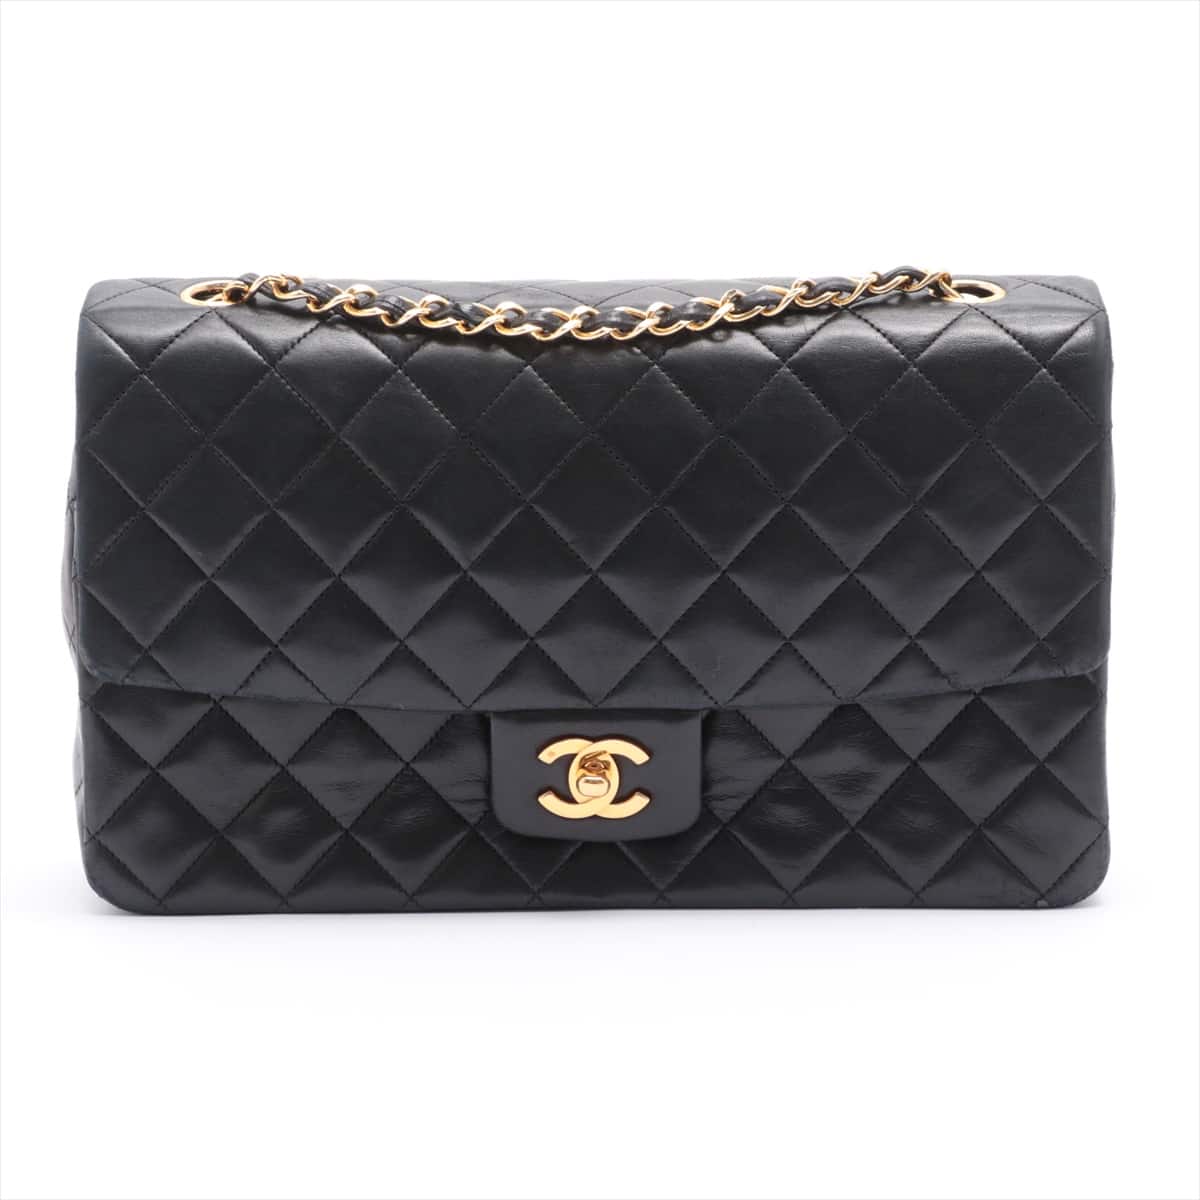 Chanel Matelasse Lambskin Single flap Double chain bag Black Gold Metal fittings 1XXXXXX with pouch